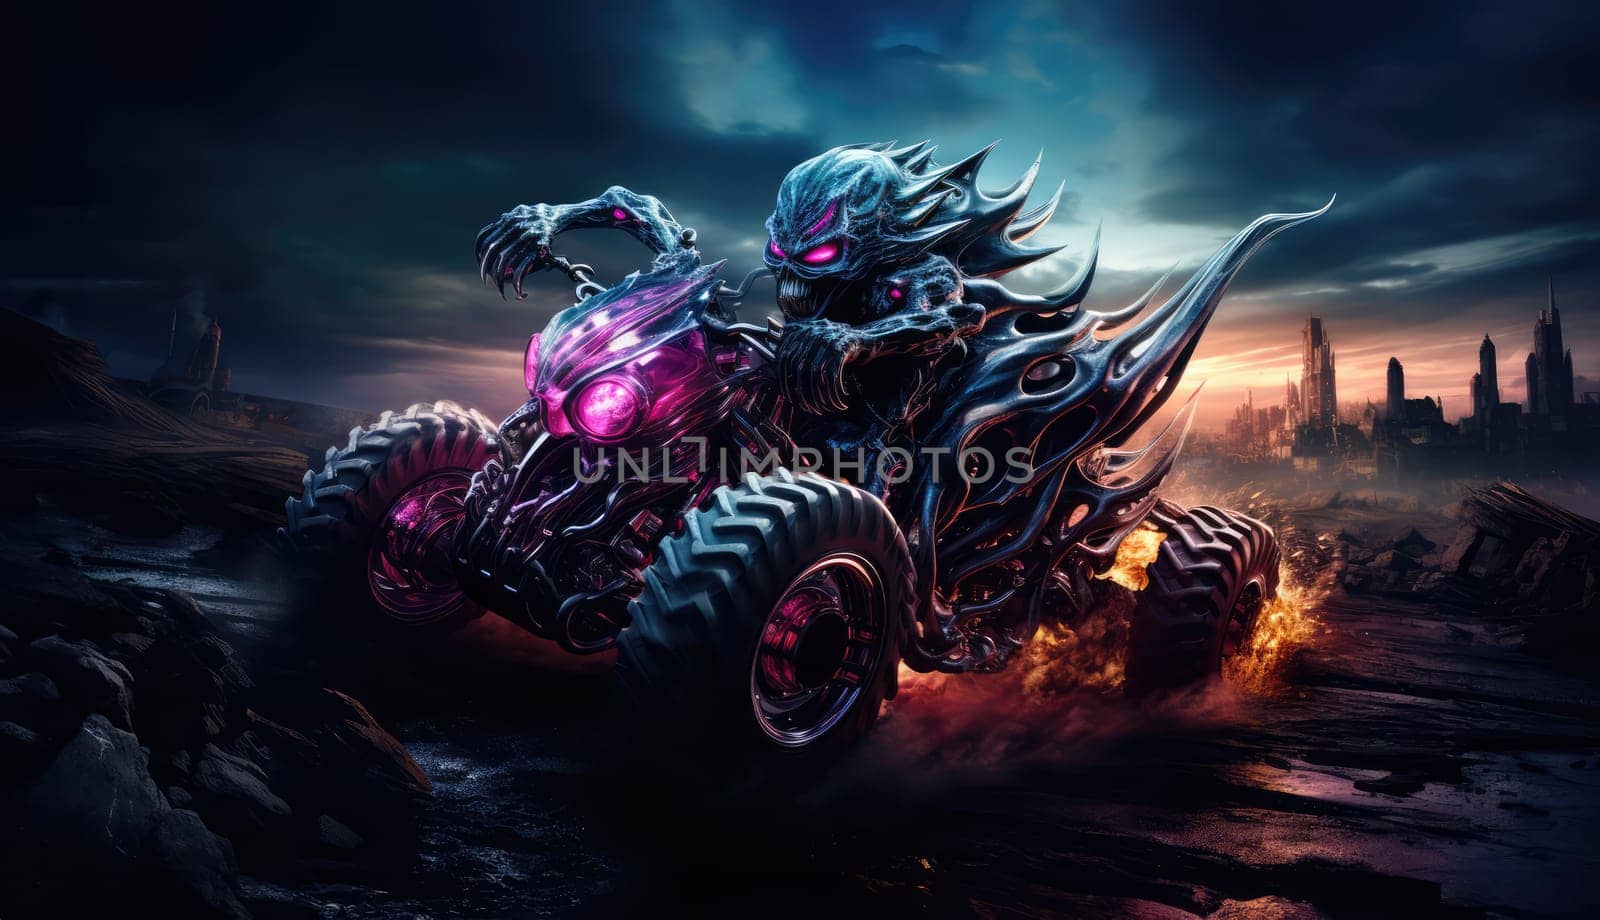 Deadly races and crazy racers monsters on bikes by palinchak